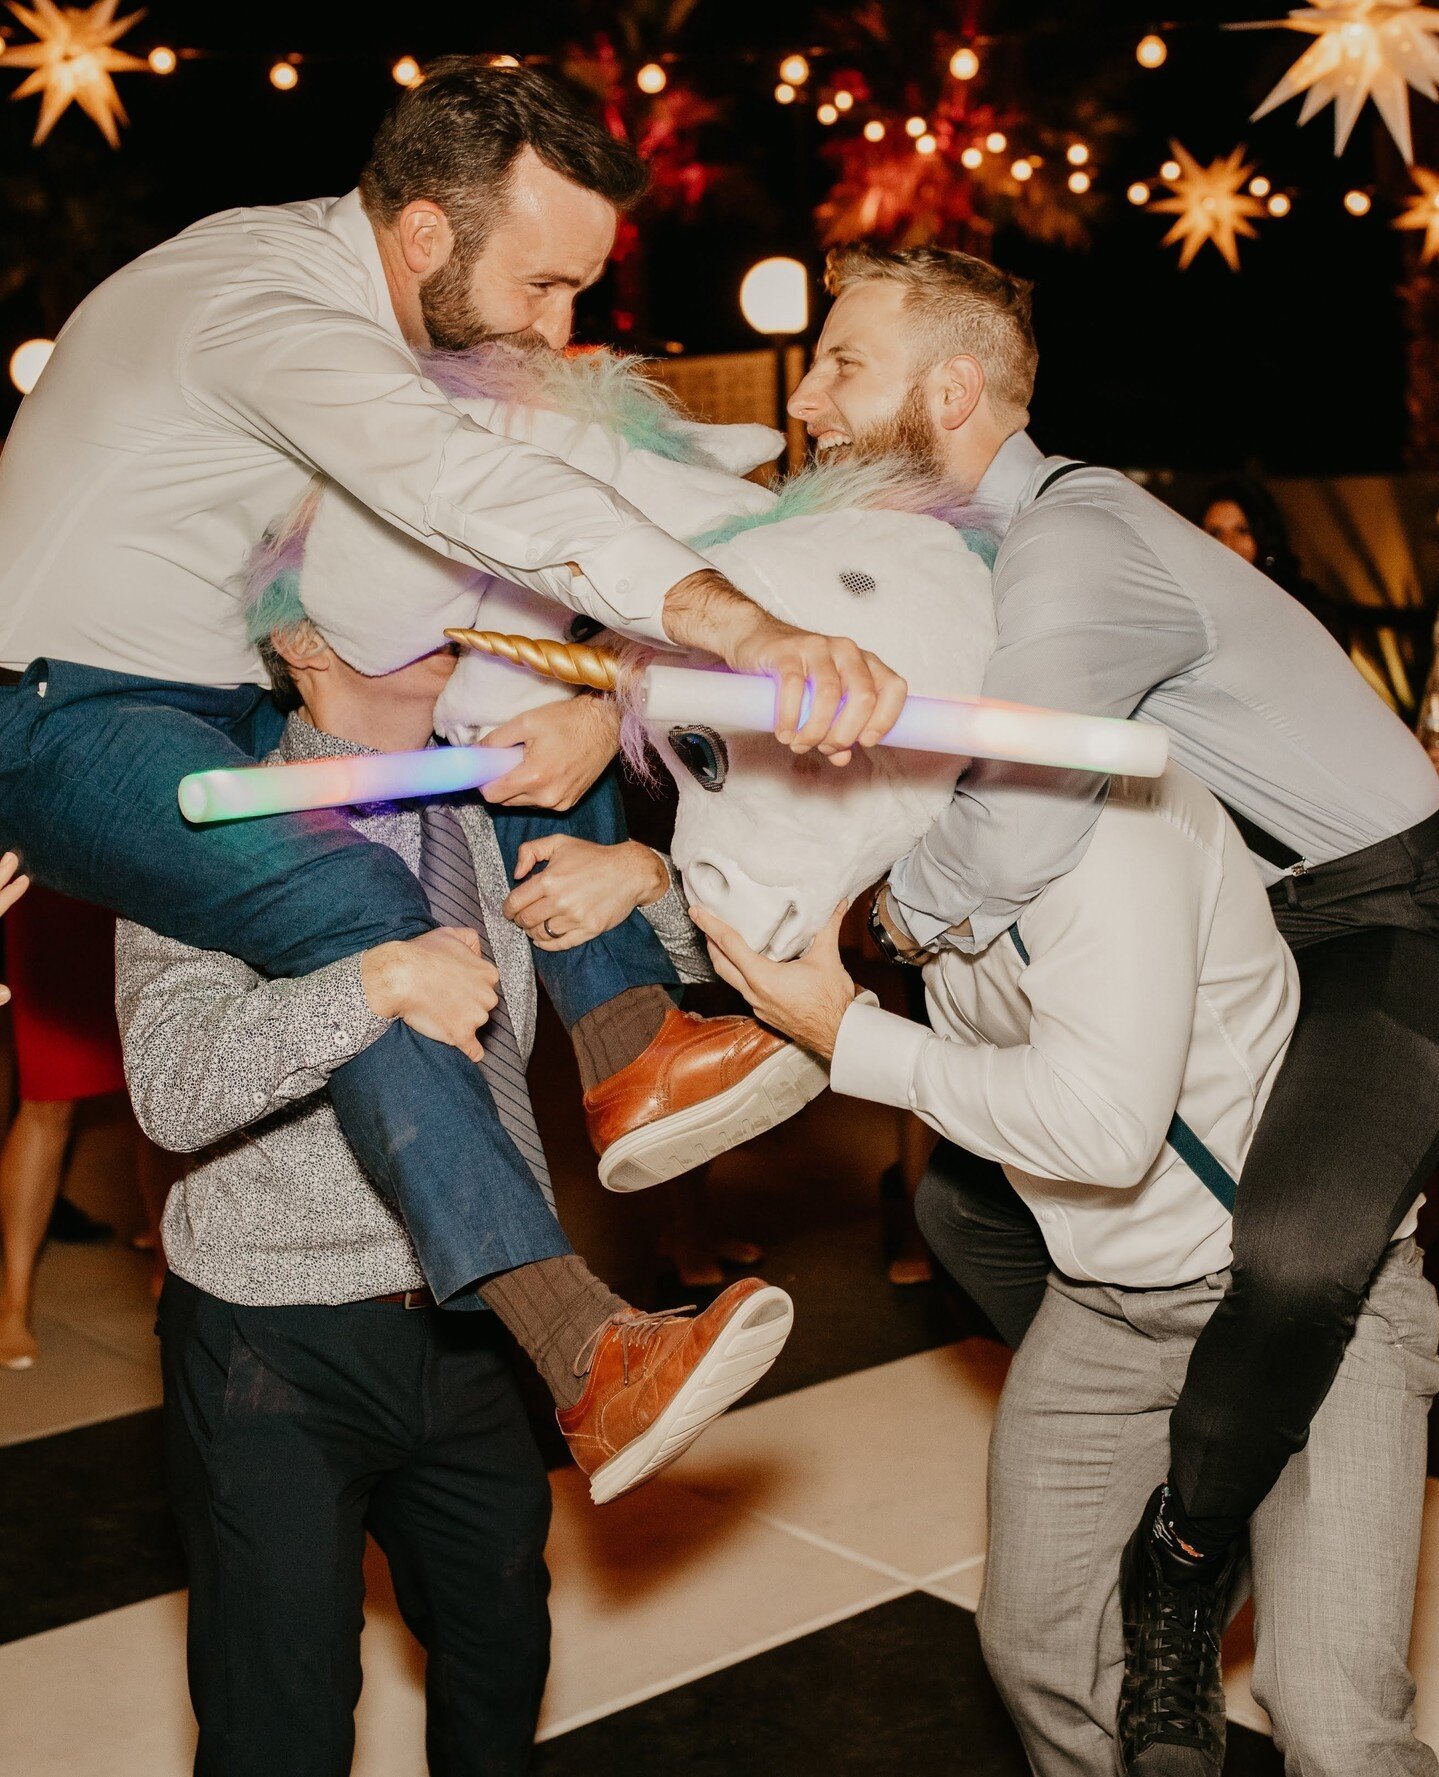 Your #MondayMotivation for the perfect dance floor comes in unicorn form this week! If you want a great dance floor and epic pictures, don't be afraid to think outside the box!!!⁠
⁠
Photo: @cassidyskyephoto⁠
Venue: @thelautnercompound